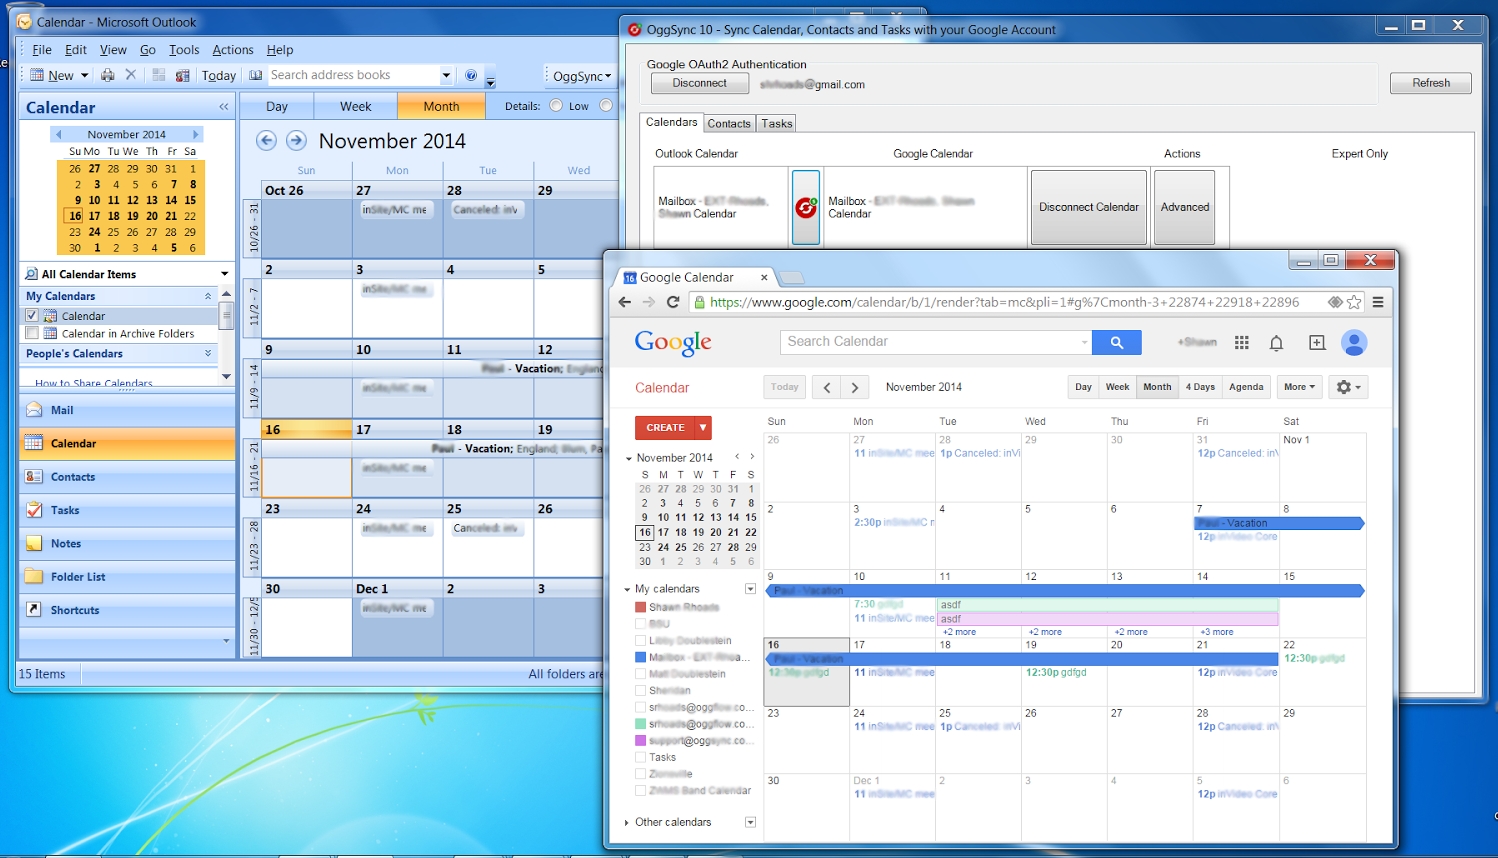 Screenshots And Videos – Oggsync regarding How To See Vacation Calendar In Outlook